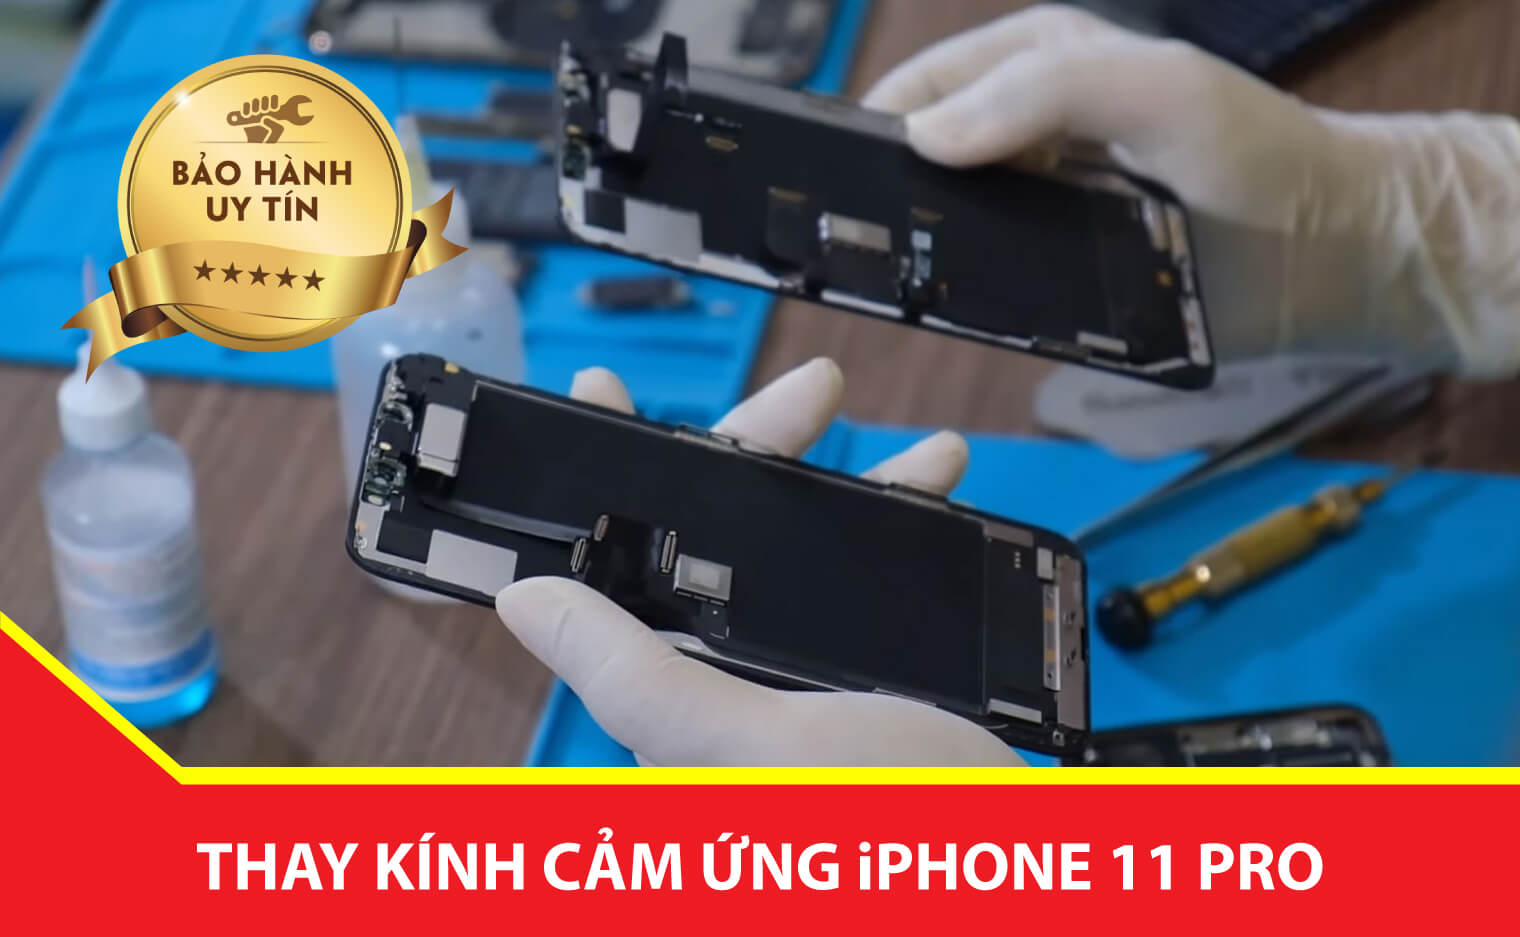 Thay kinh cam ung iPhone 11 Pro